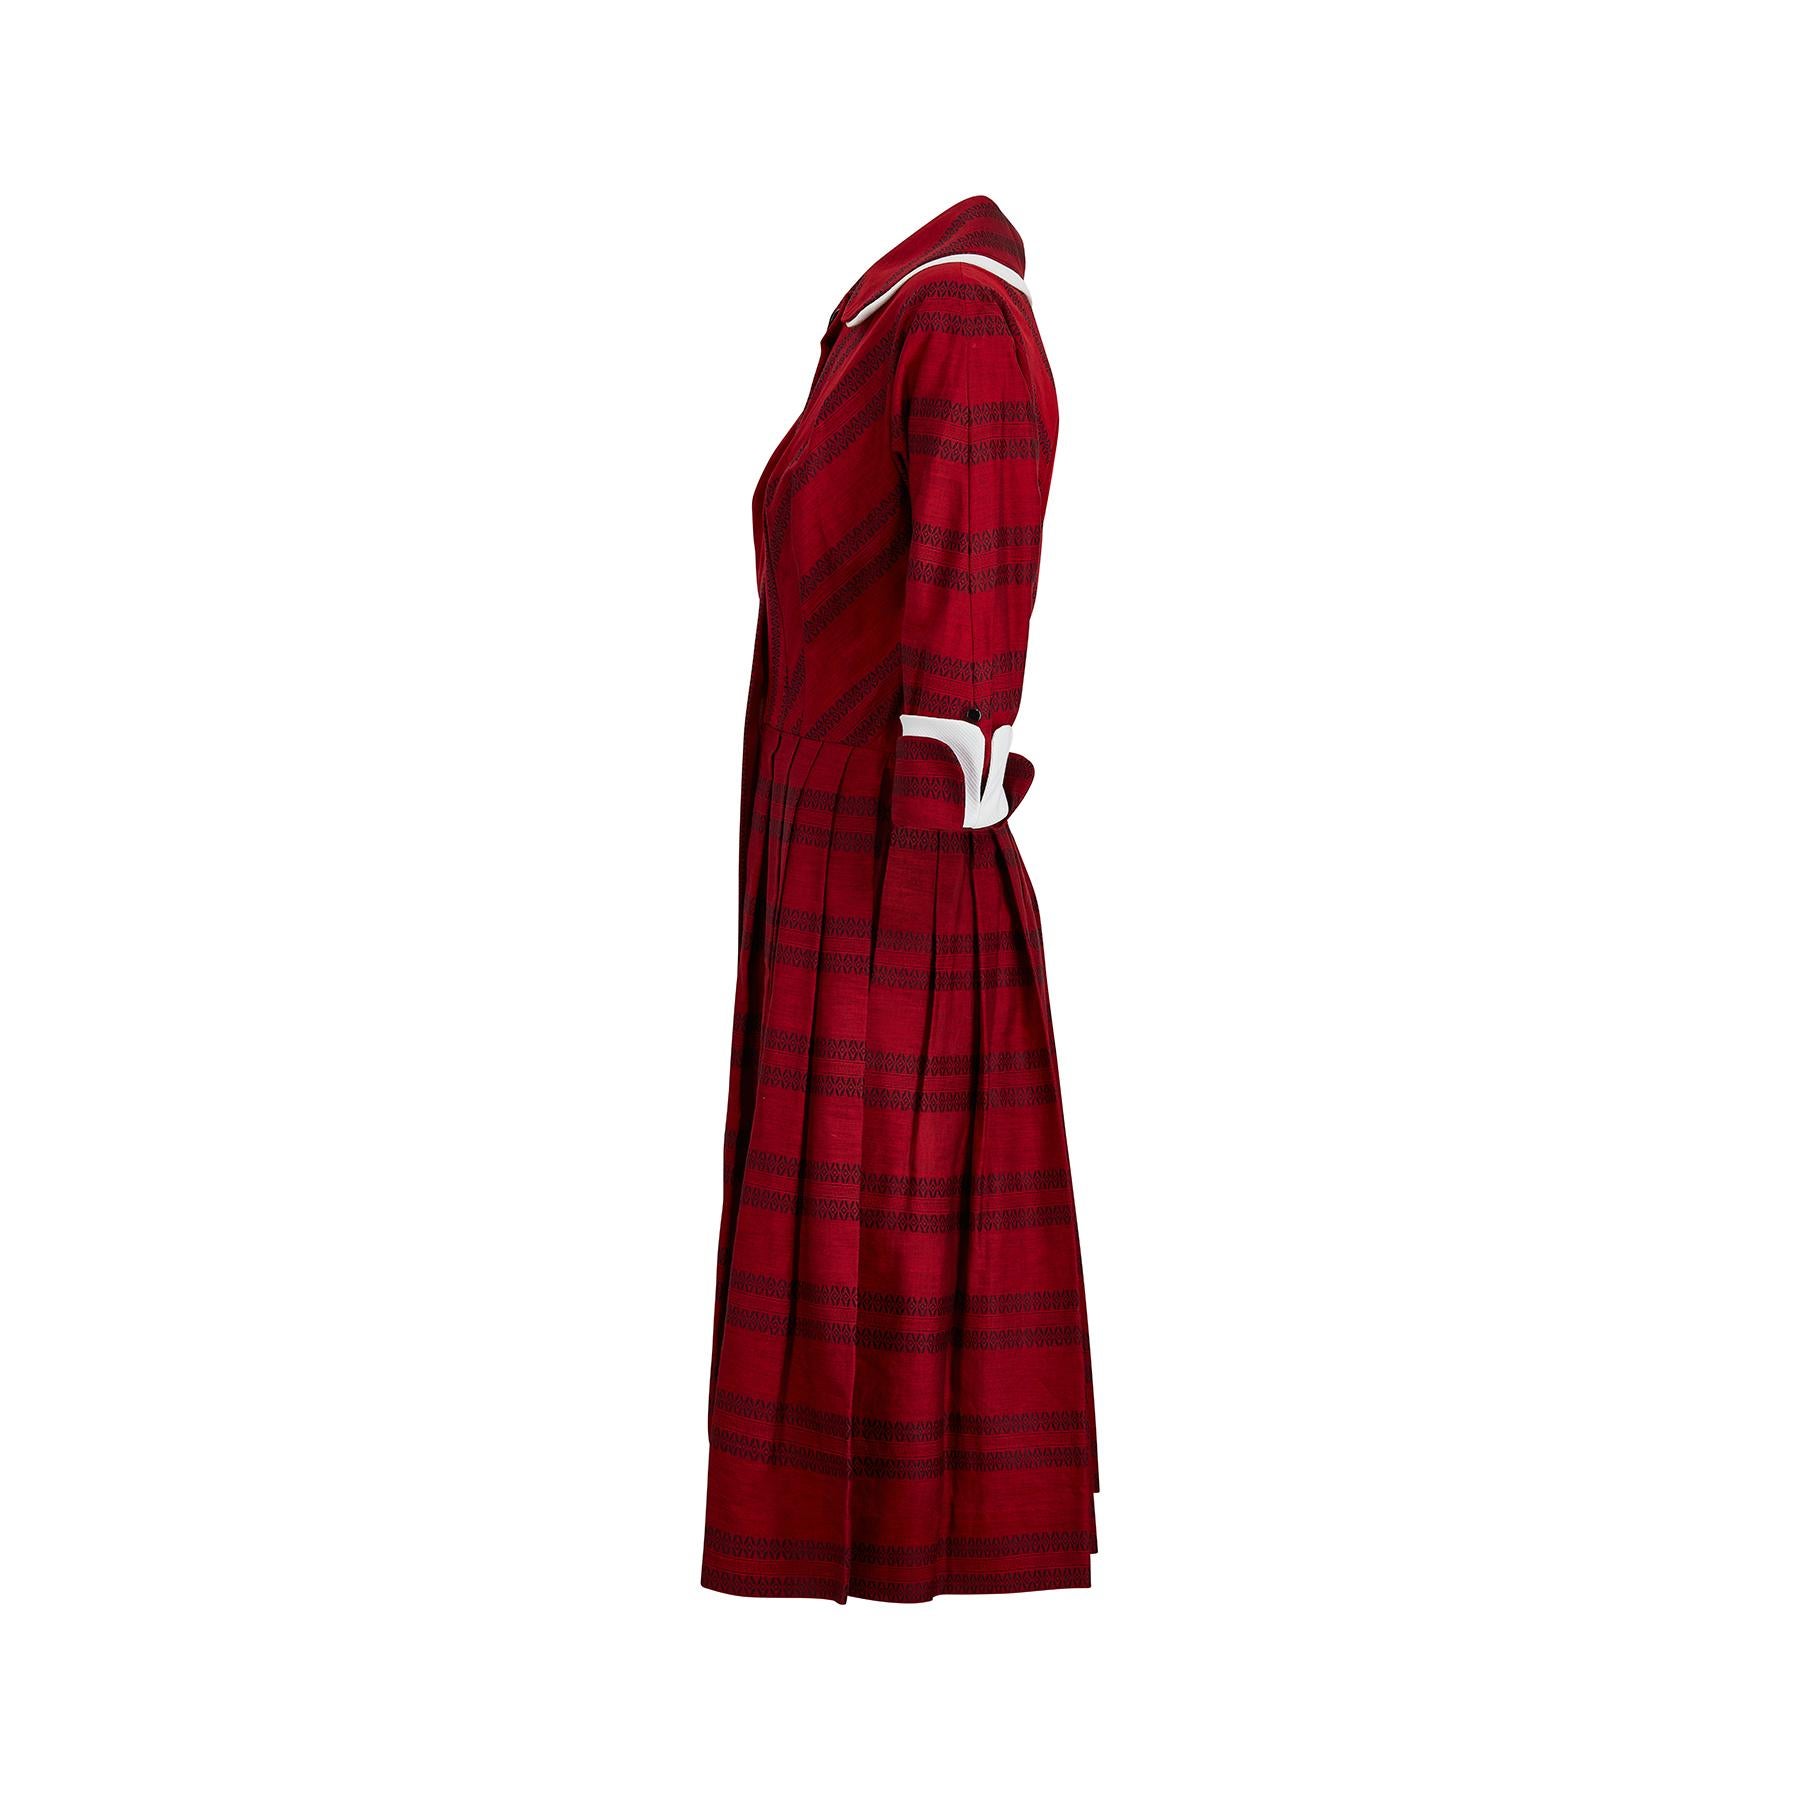 This is a superb and incredibly classic late 1950s shirtwaister dress by Lou-Ette of California. It is made from a beautiful deep burgundy red cotton with a delicate black woven geometric design. The collar and sleeves have a white waffle cotton